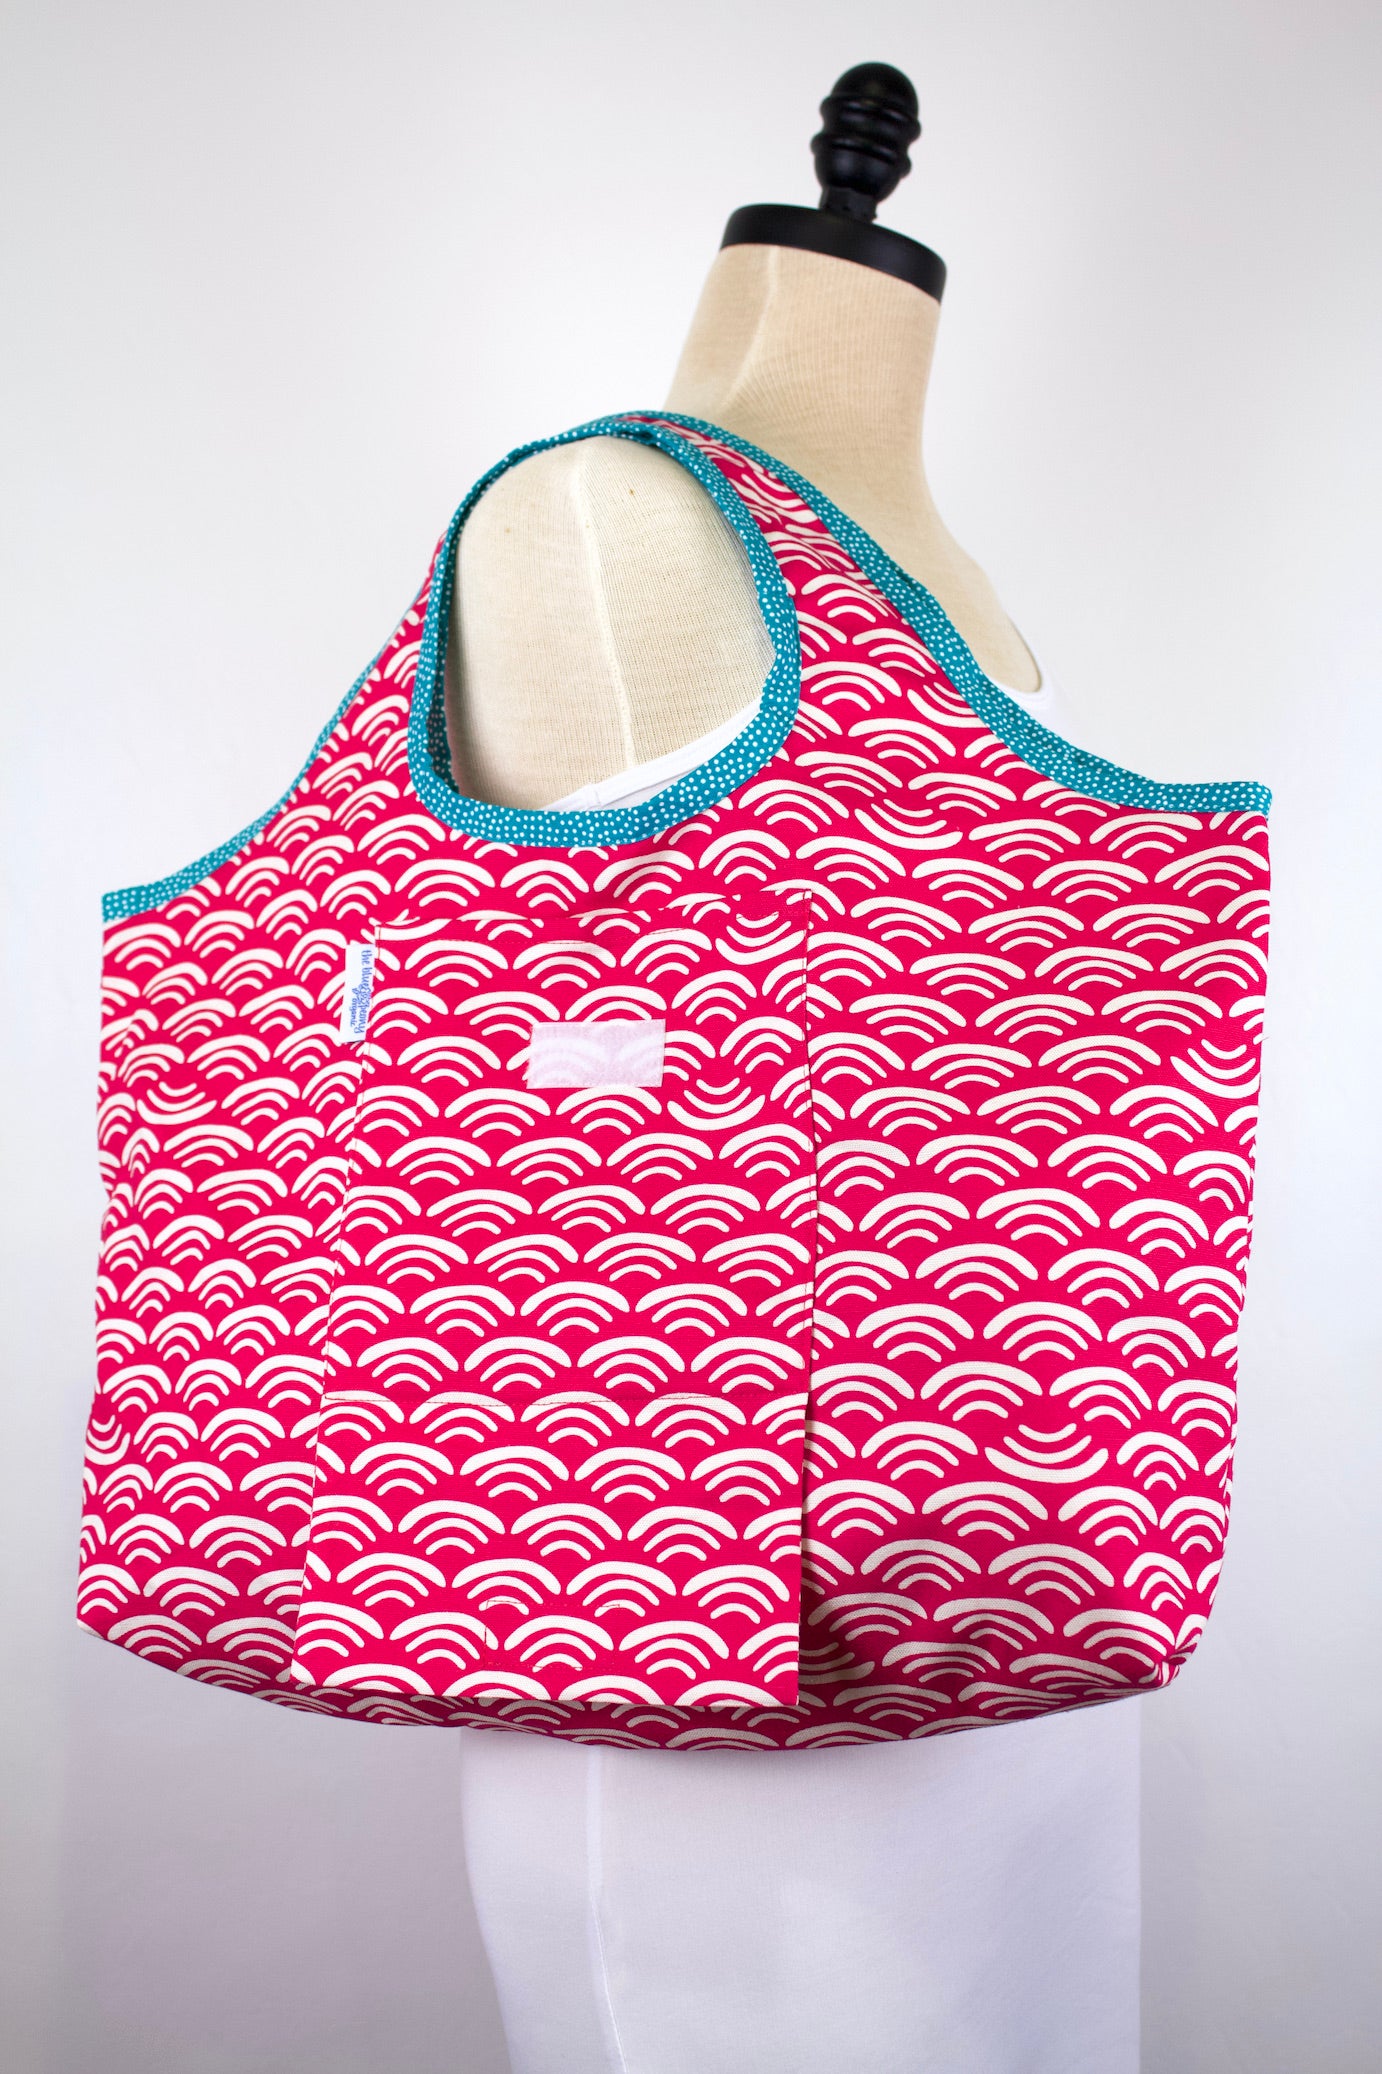 Koi Folding Shopping Tote in Organic Cotton-The Blue Peony-Category_Foldable Bag,Color_Pink,Department_Personal Accessory,Material_Organic Cotton Canvas